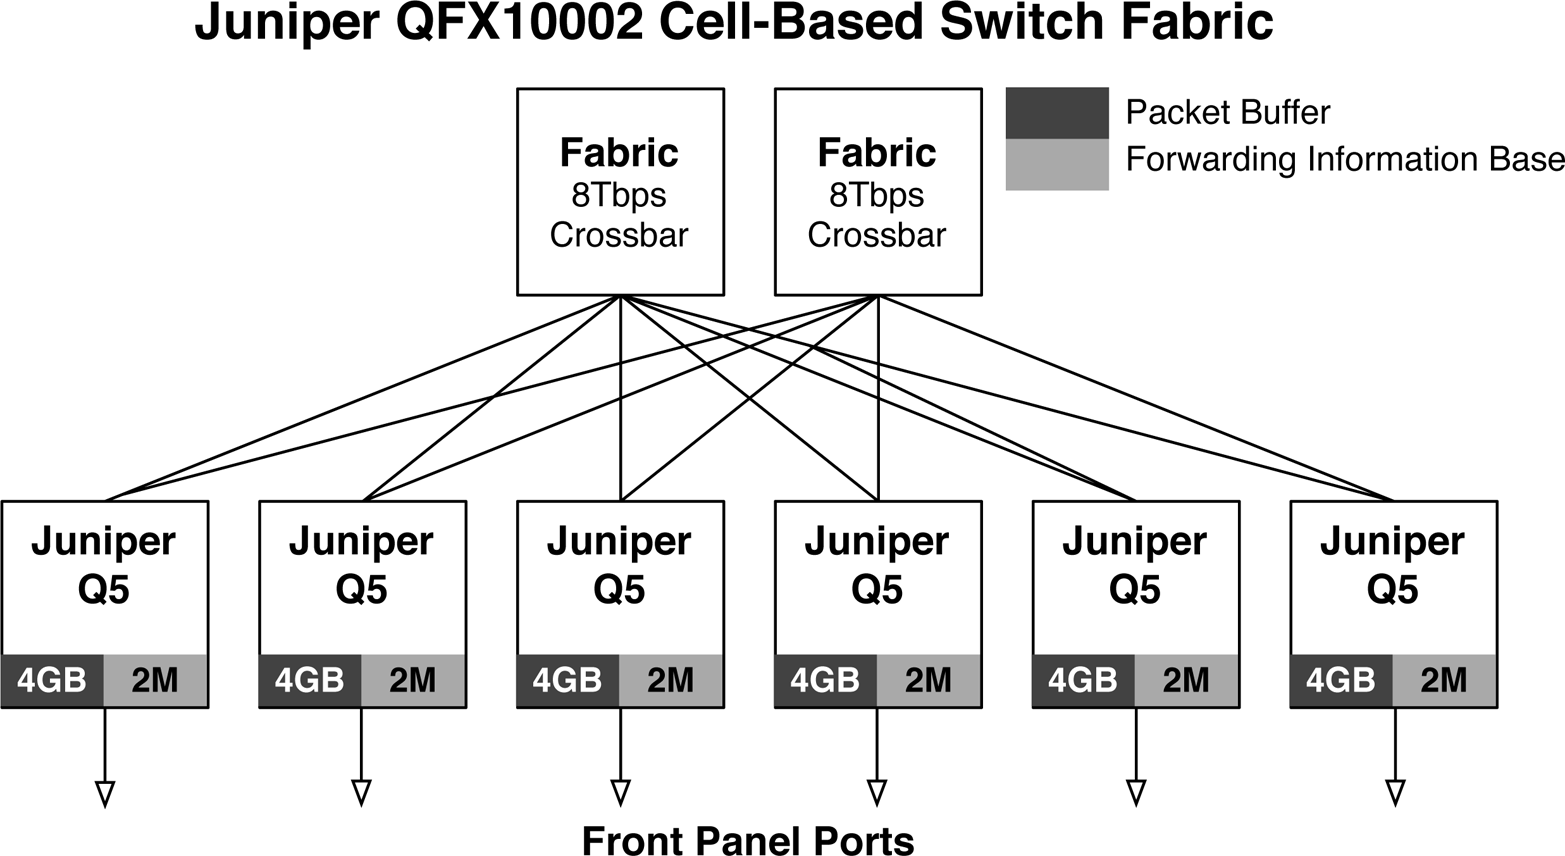 Juniper QFX10002 cell-based switching fabric